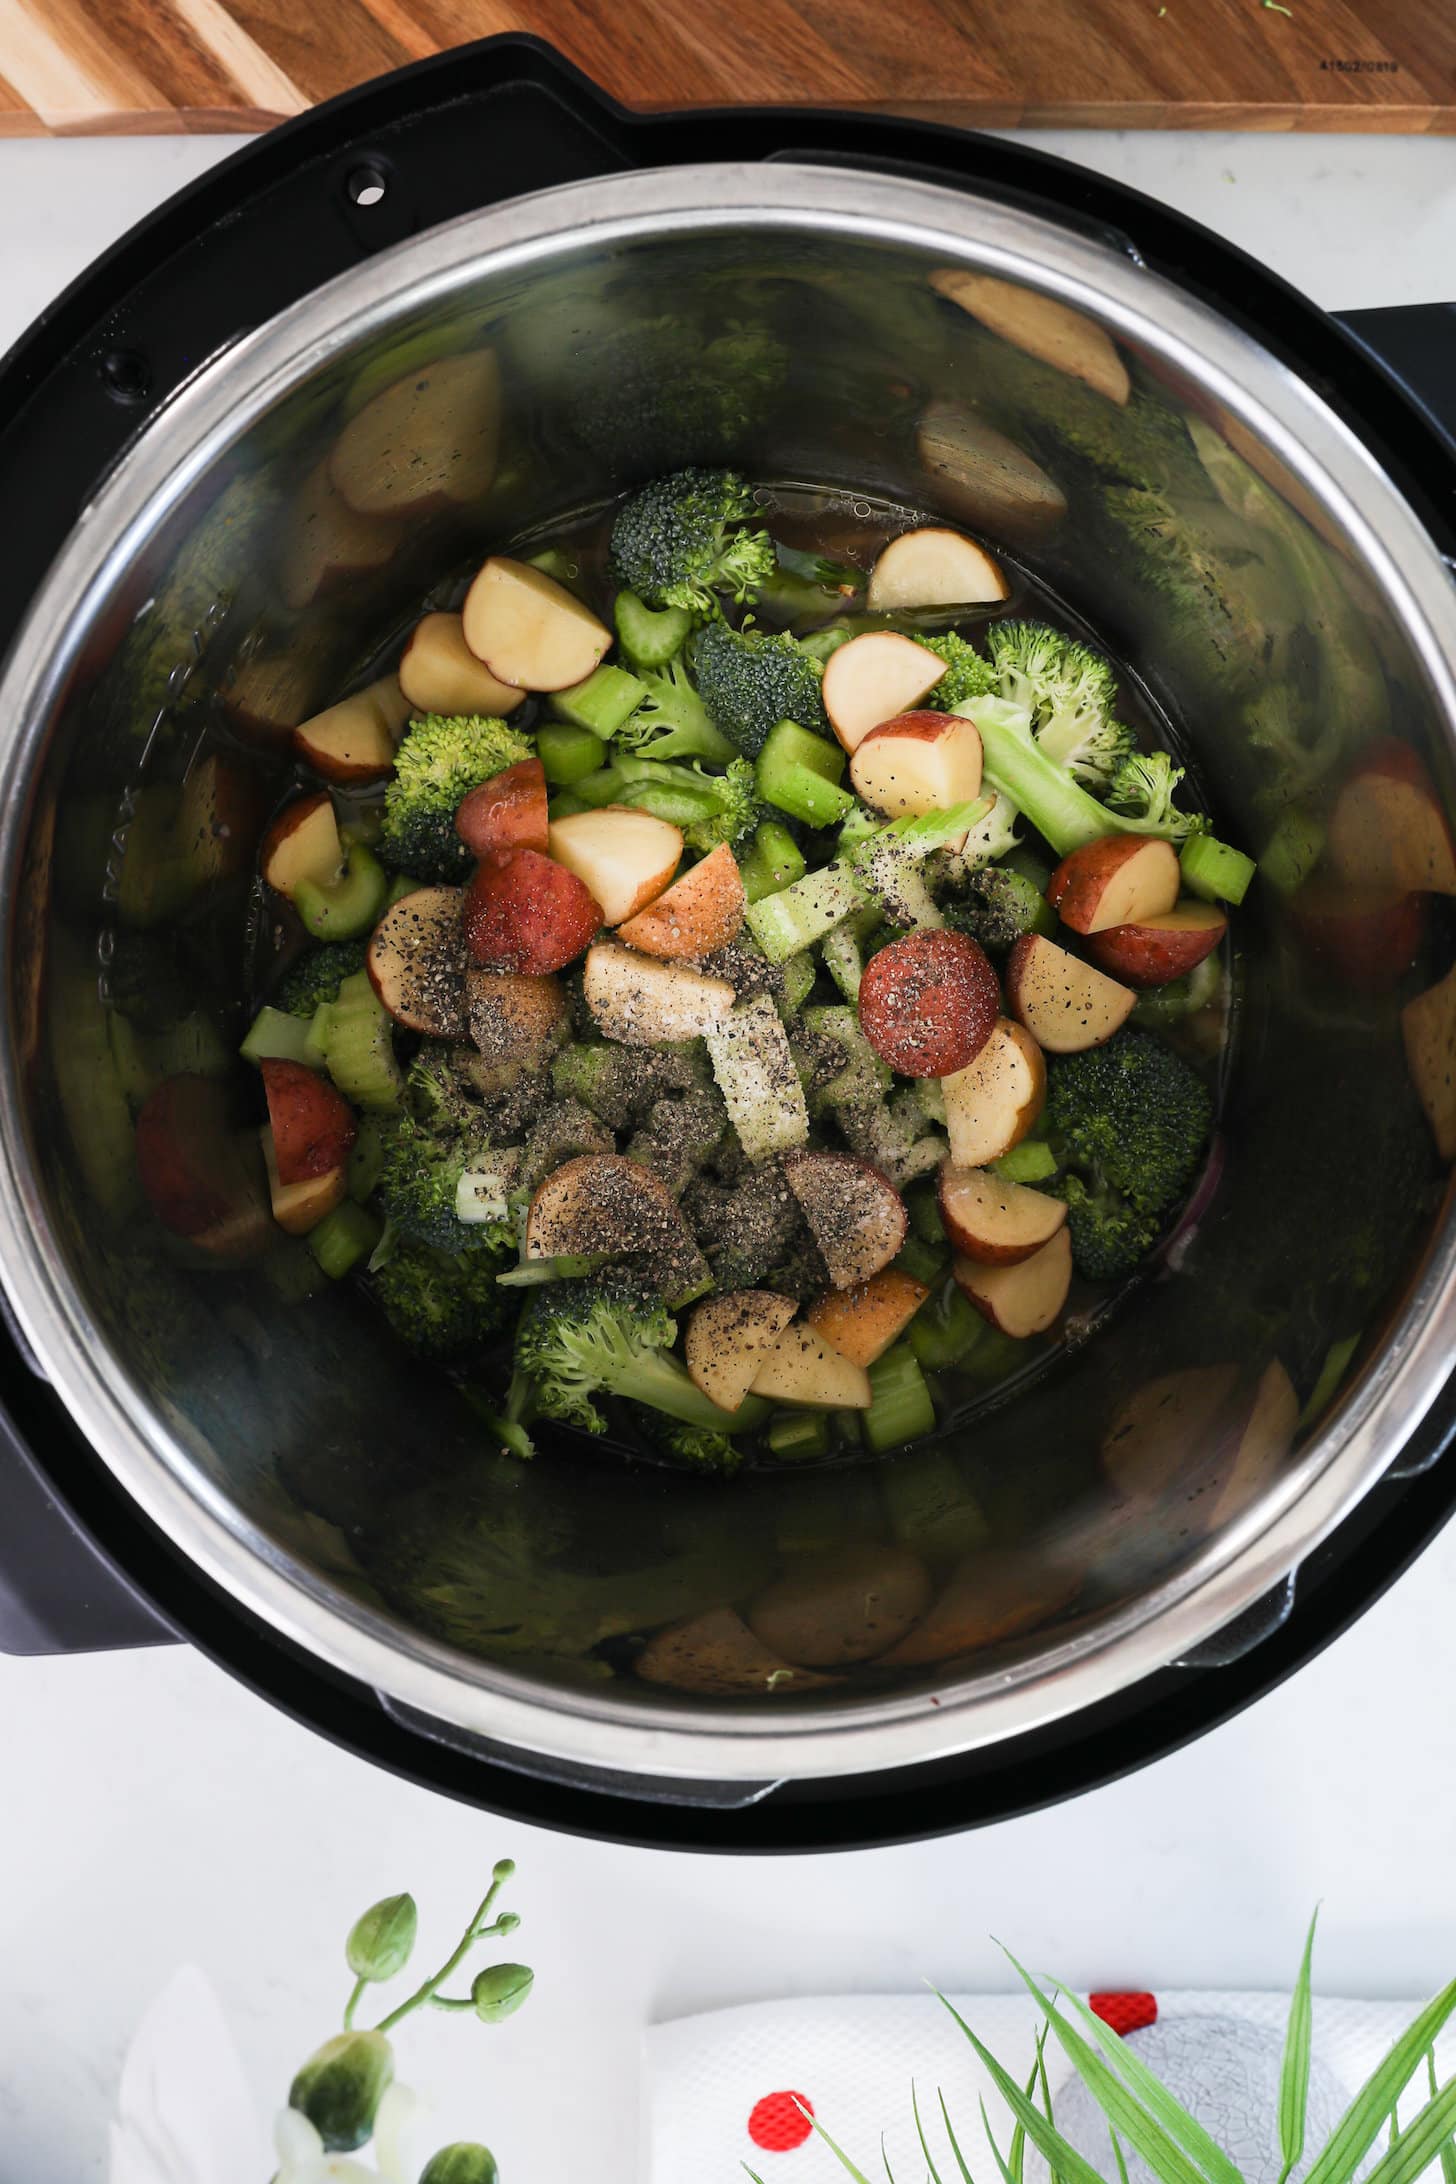 Birdseye view of Instant pot with chopped vegetables coated in pepper.